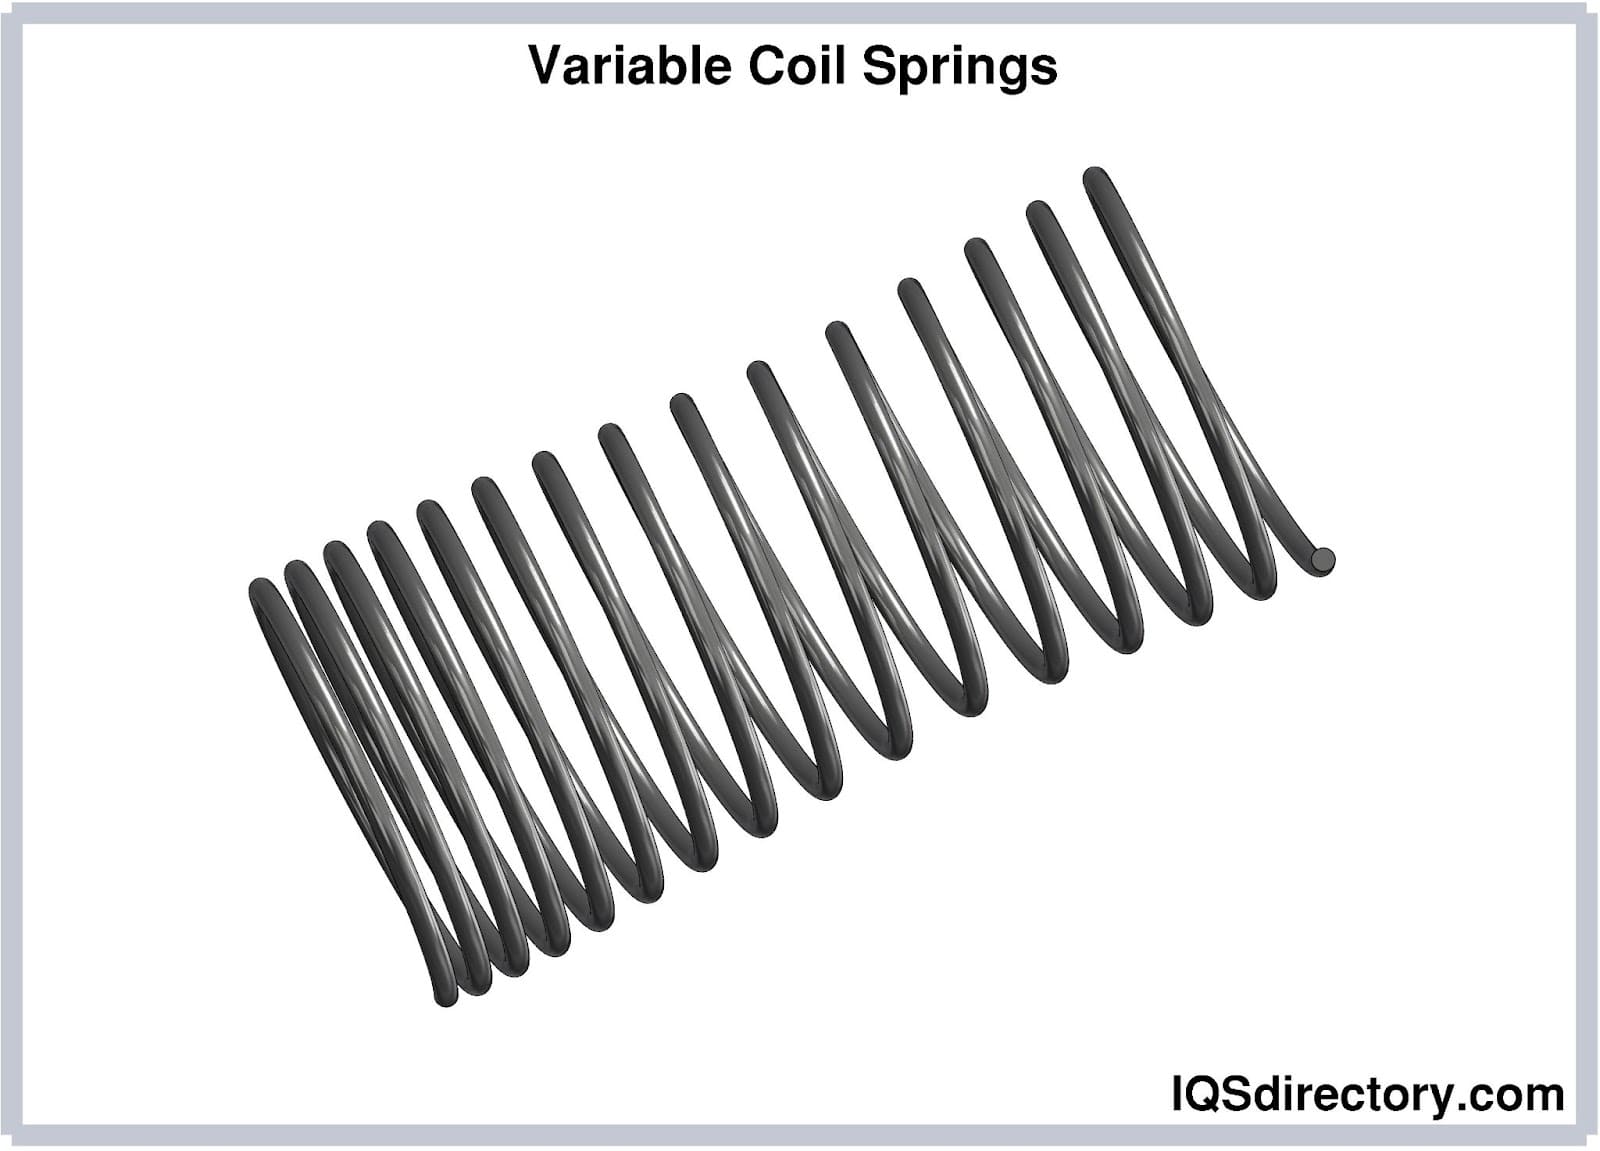 Variable Coil Springs